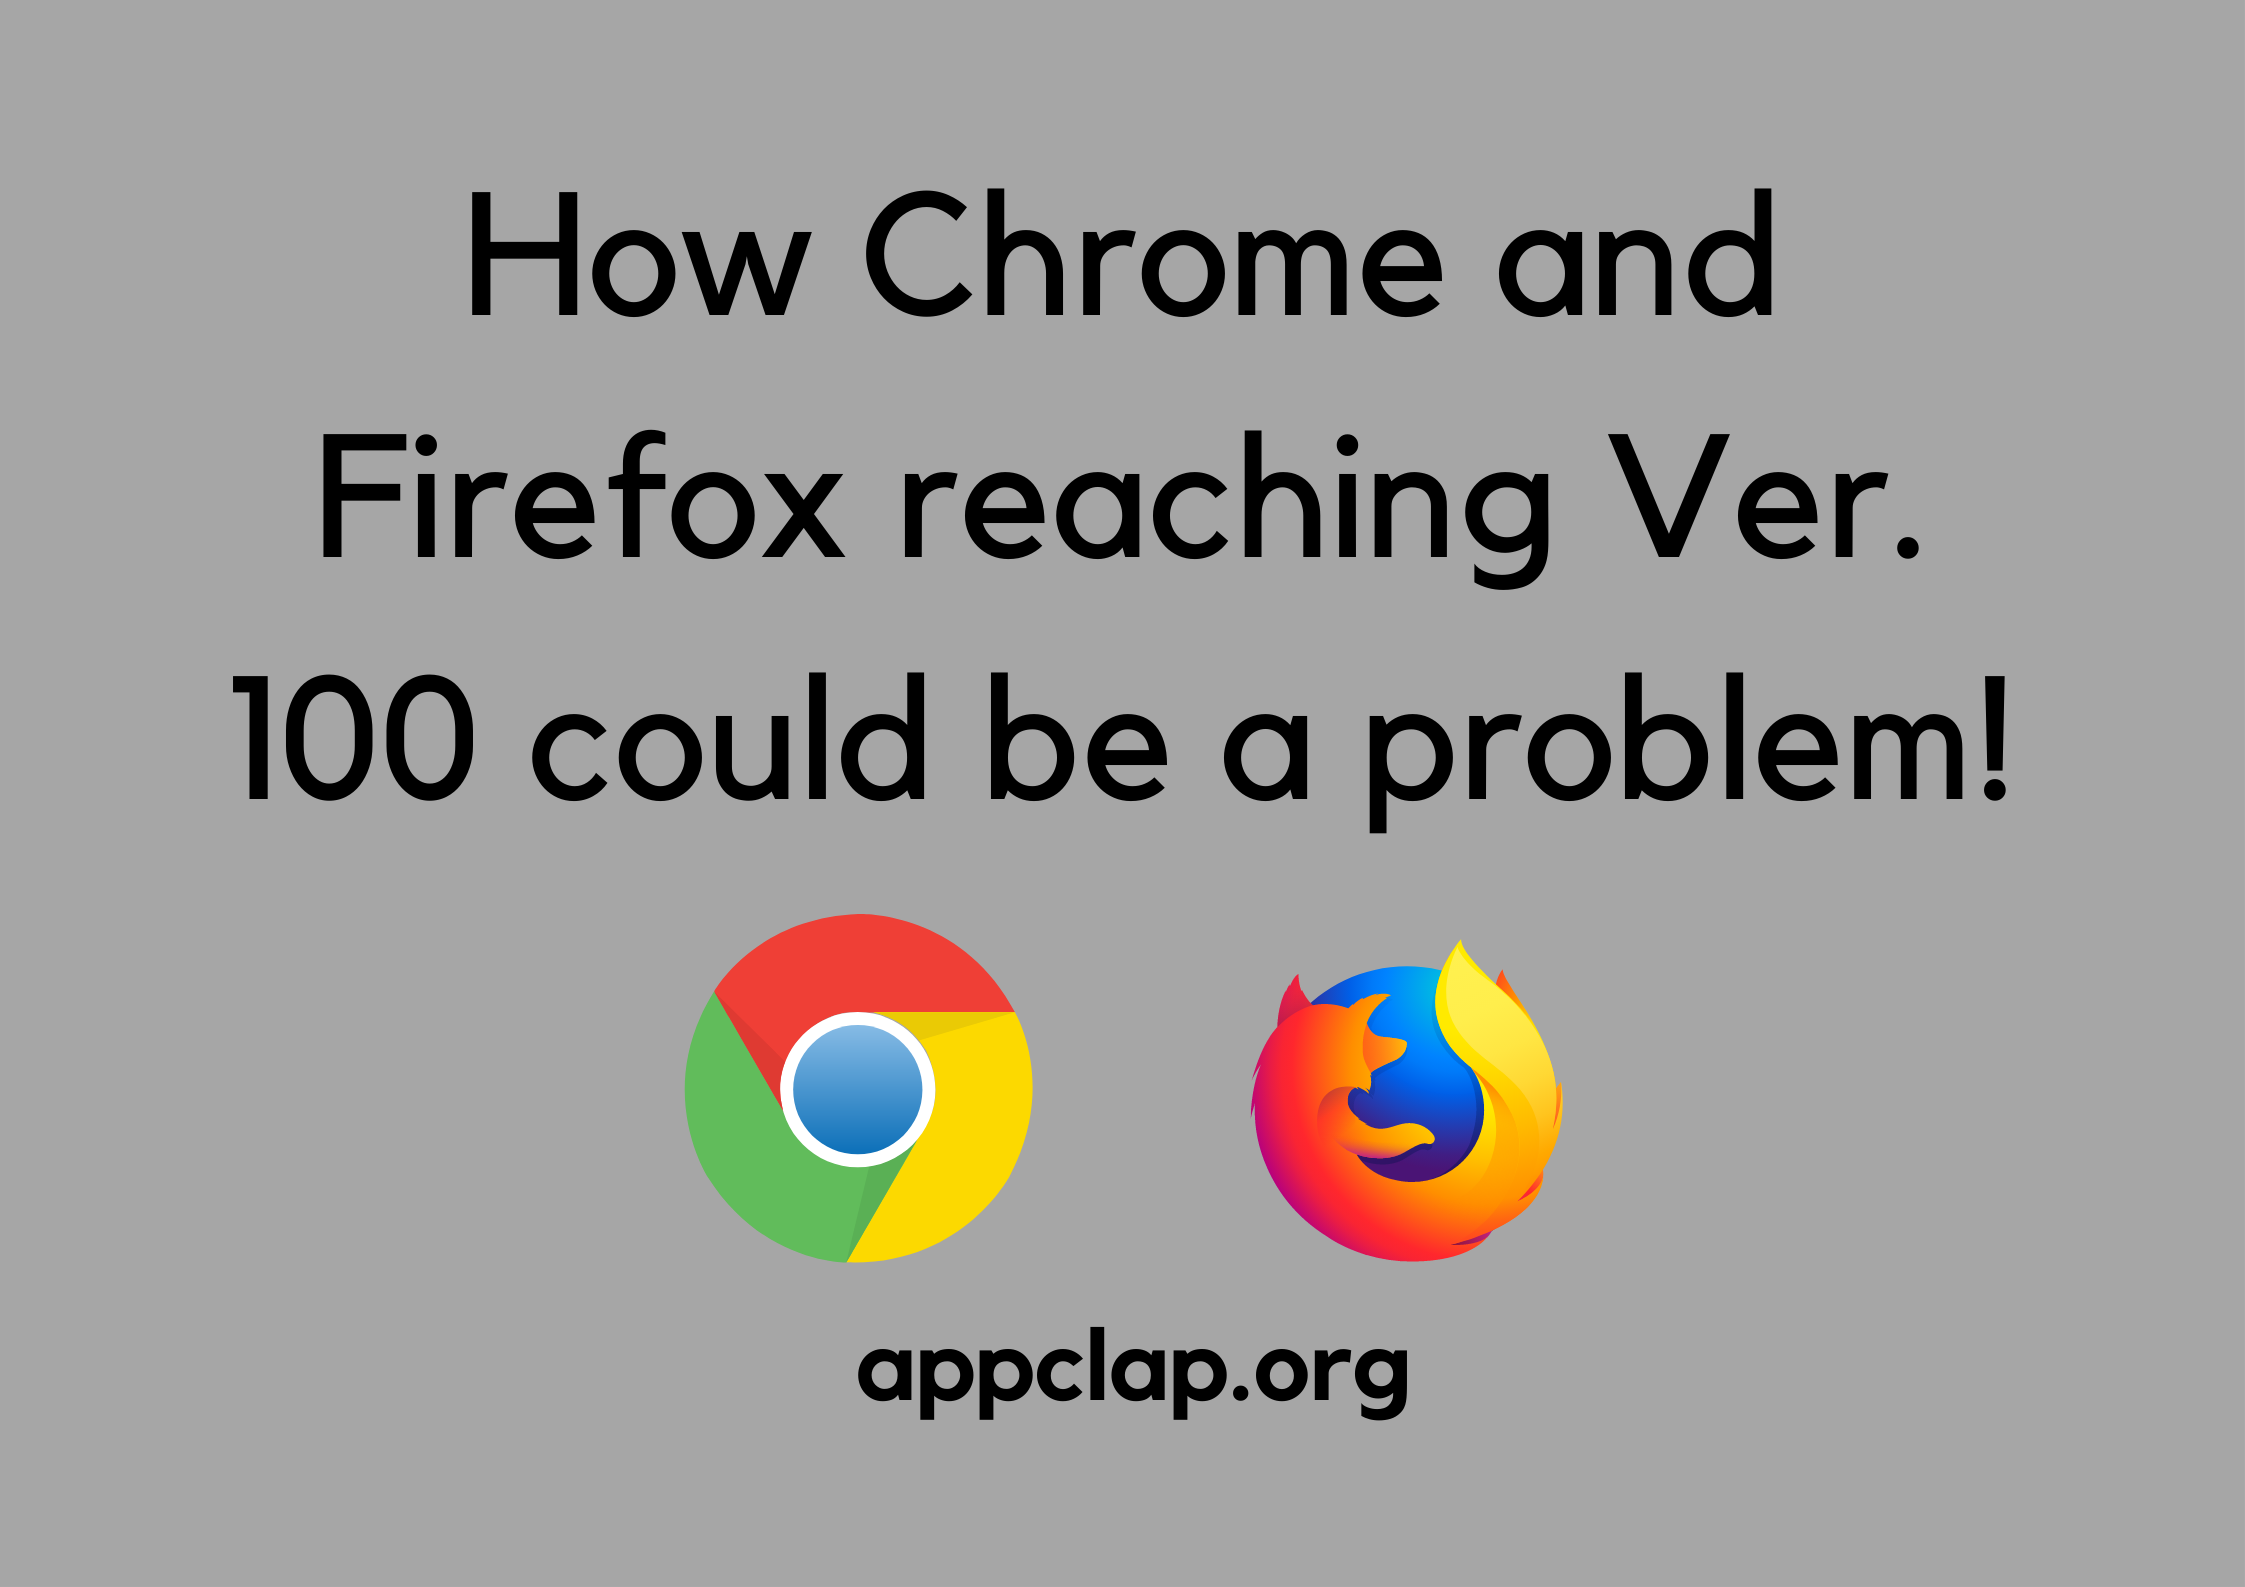 How Chrome and Firefox reaching Ver. 100 could be a problem!